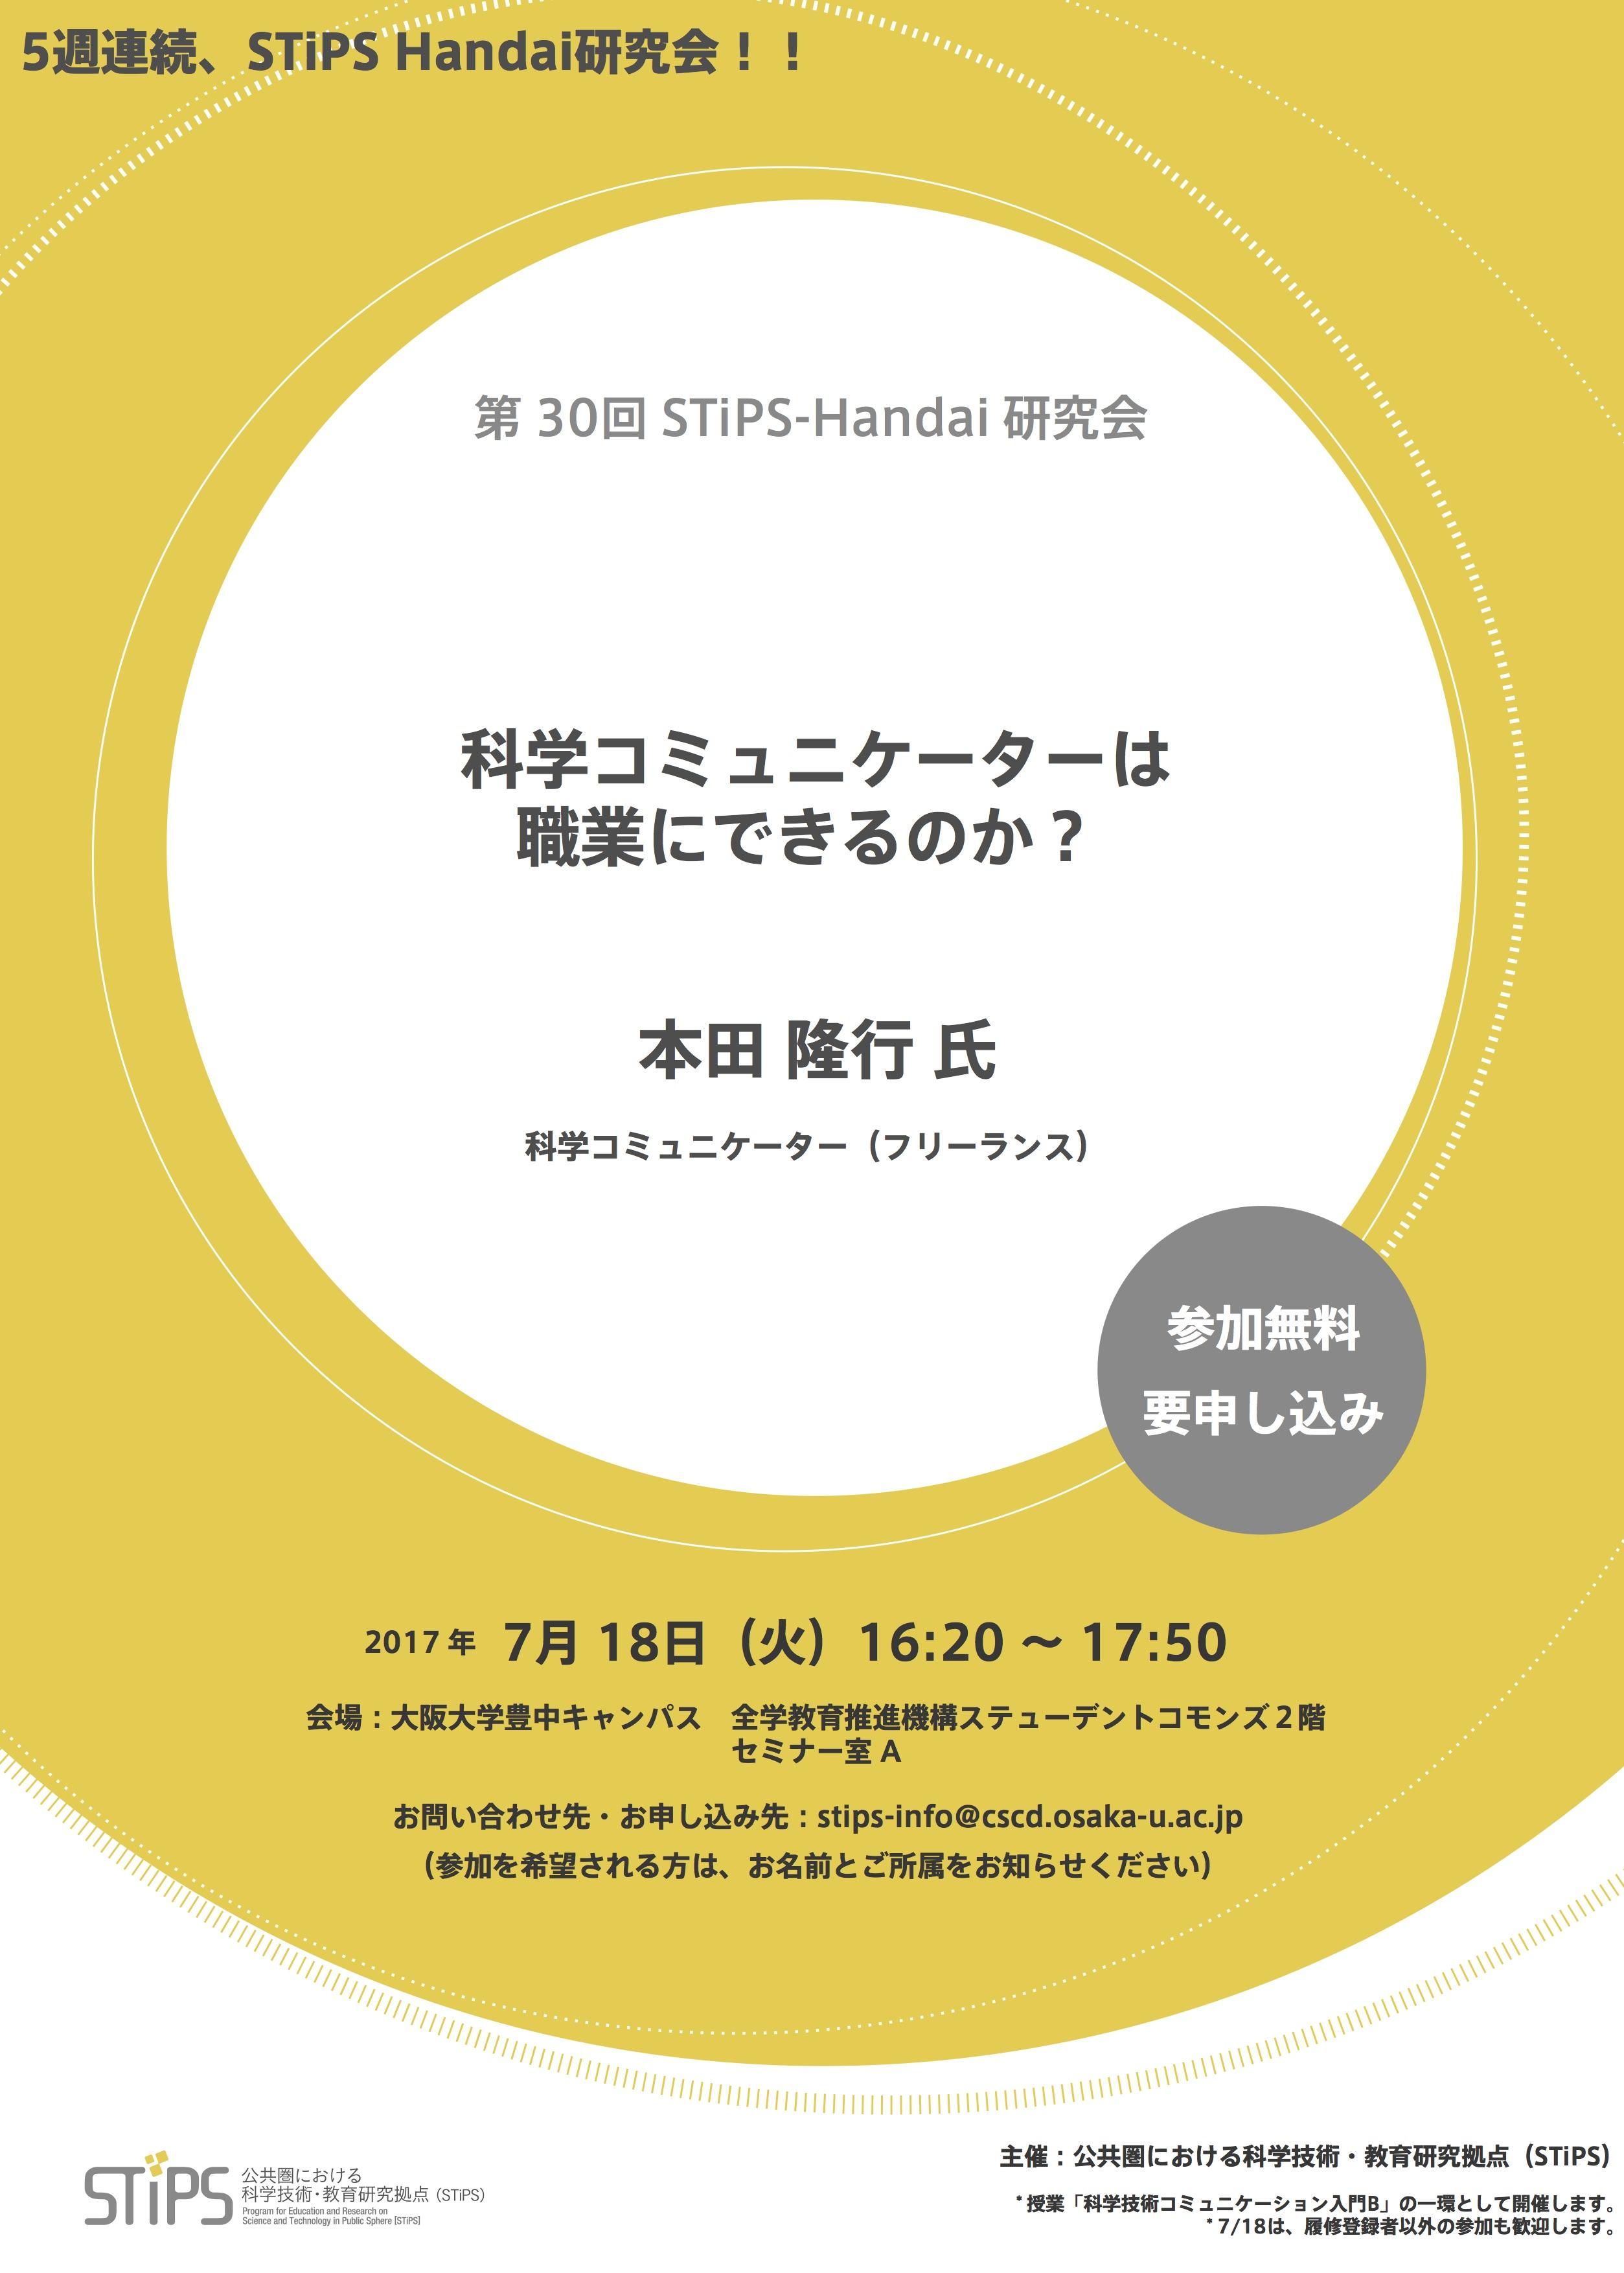 http://scirex.grips.ac.jp/events/STiPS-Handai_for170718.jpg